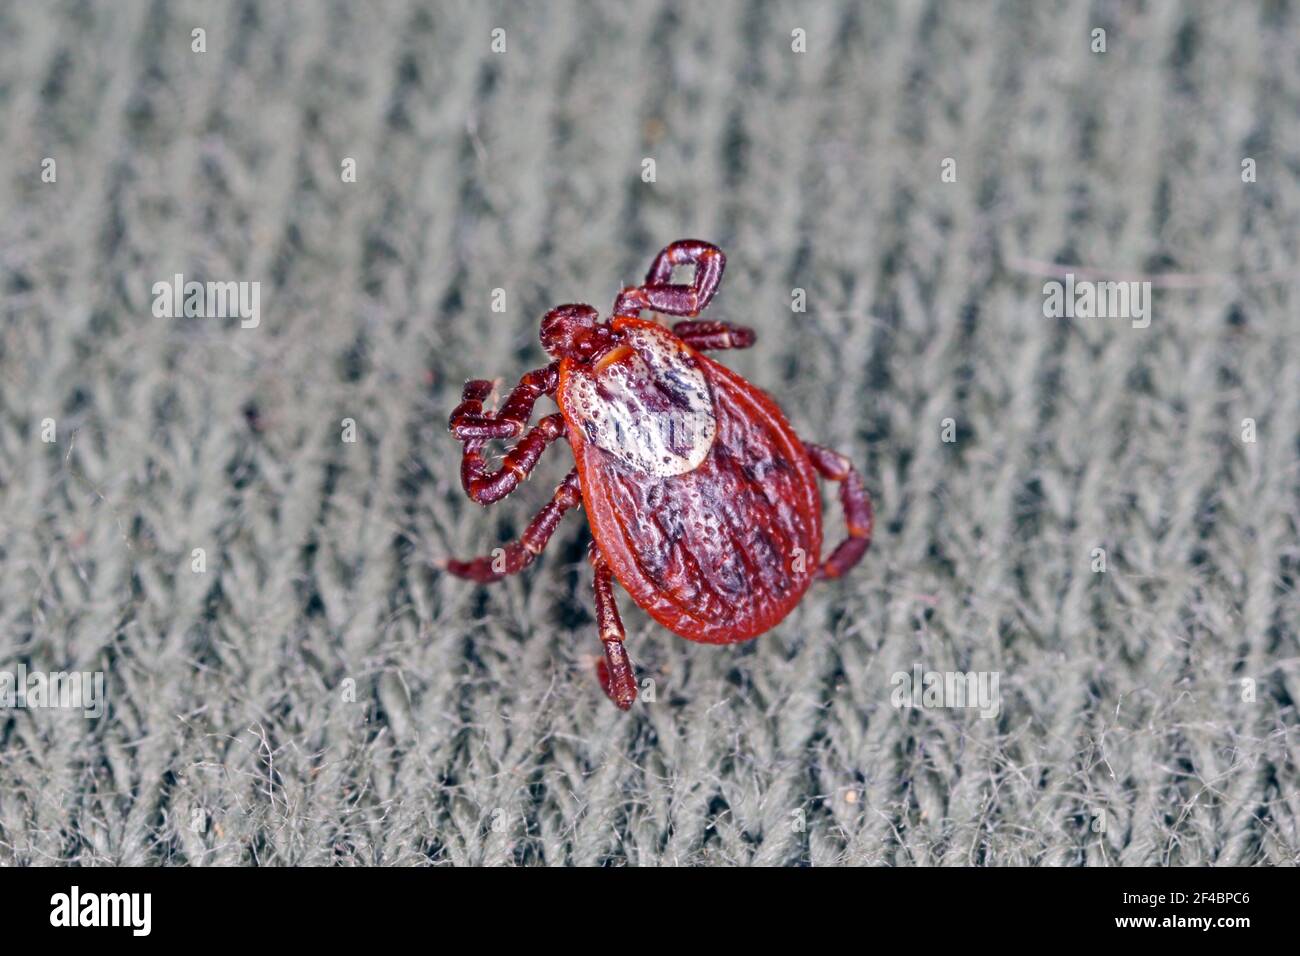 Tick walking on clothes. High magnification. Stock Photo